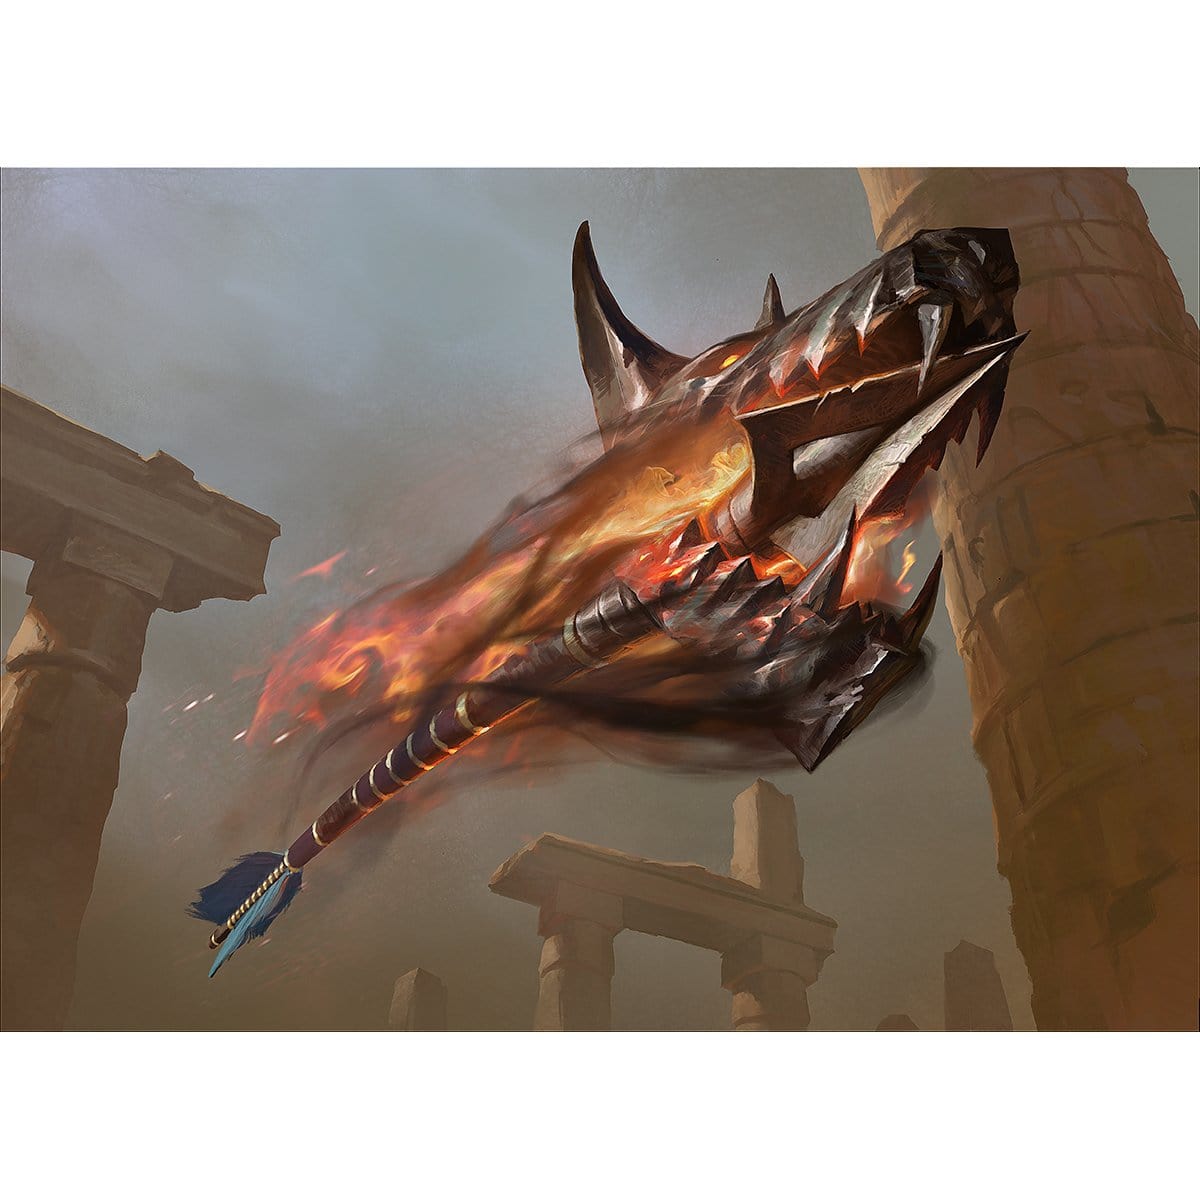 Open Fire Print - Print - Original Magic Art - Accessories for Magic the Gathering and other card games